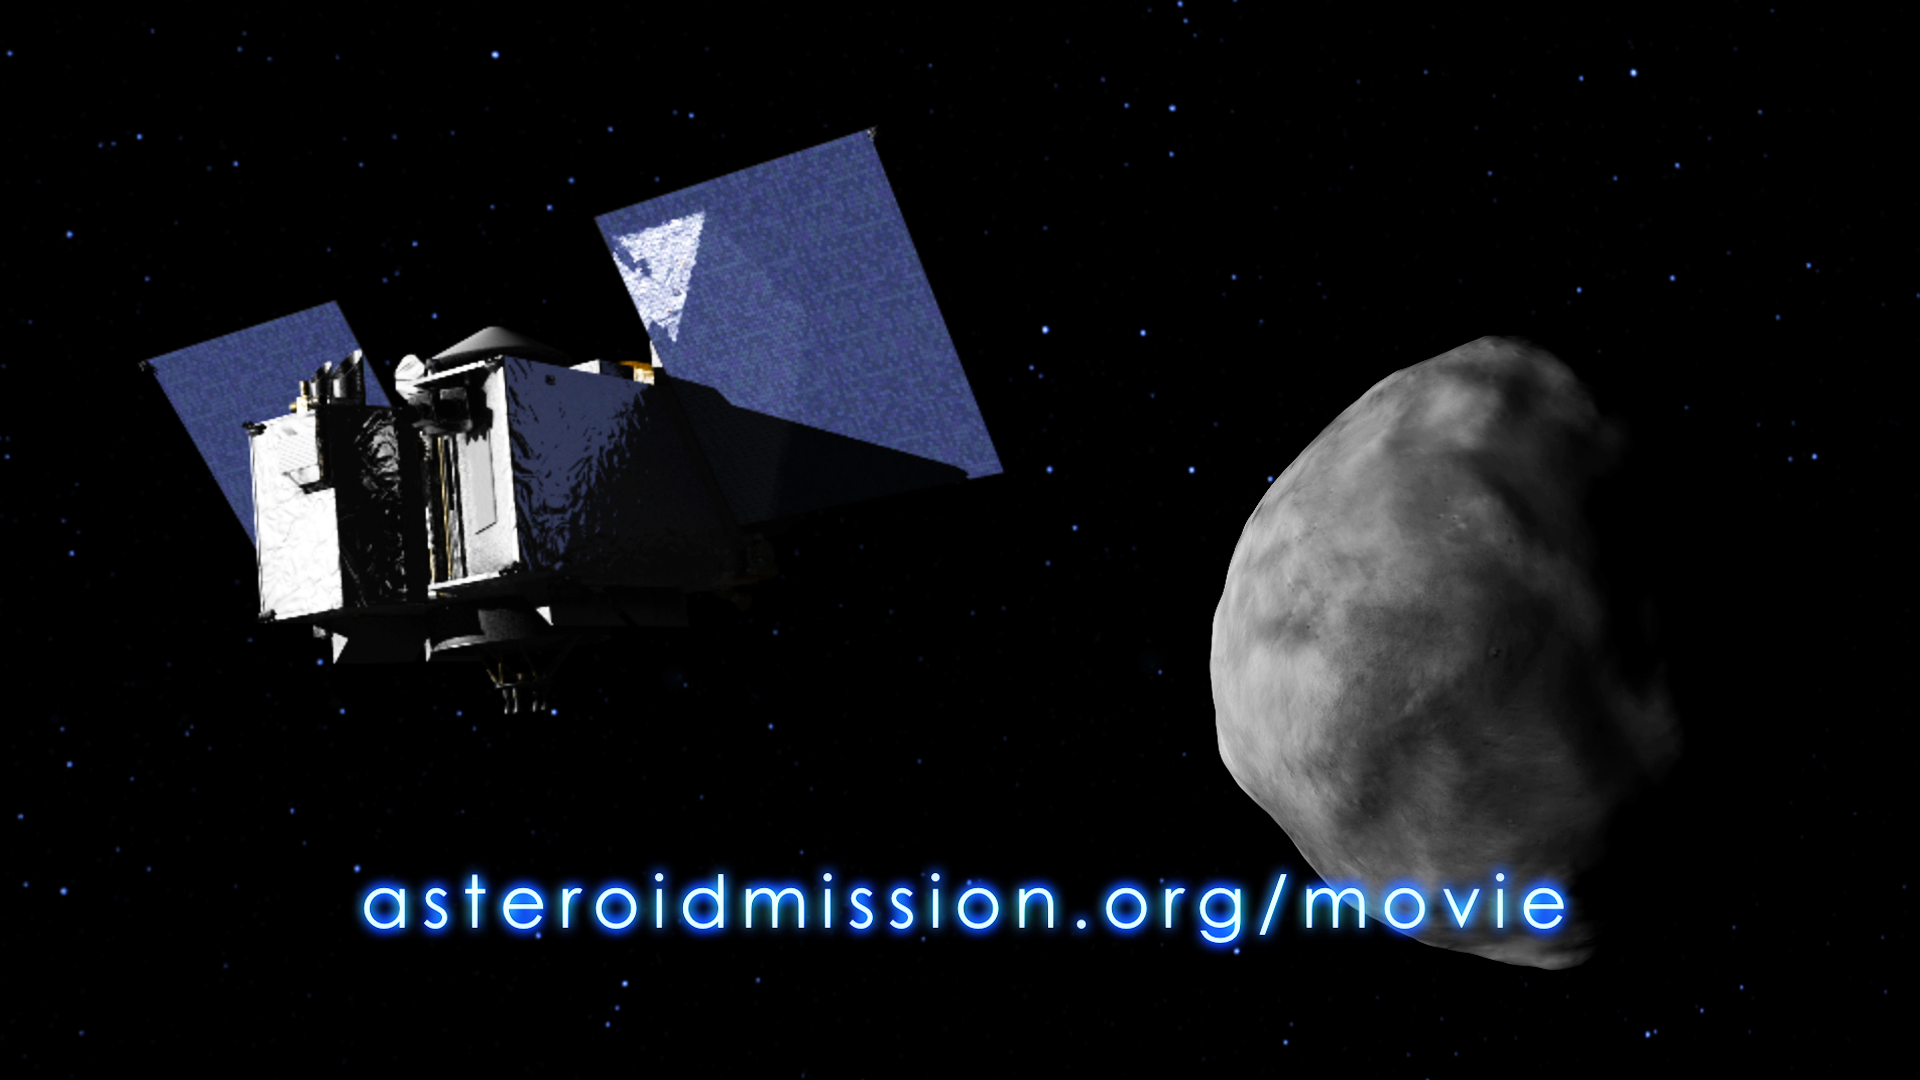 Asteroid Bennu (1999-RQ36) is a survivor of our solar system's chaotic formation, composed of the same raw ingredients that created our planet. When NASA's OSIRIS-REx mission visits asteroid Bennu, its findings will teach us a great deal about our own origins.Watch this video on the NASAexplorer YouTube channel.